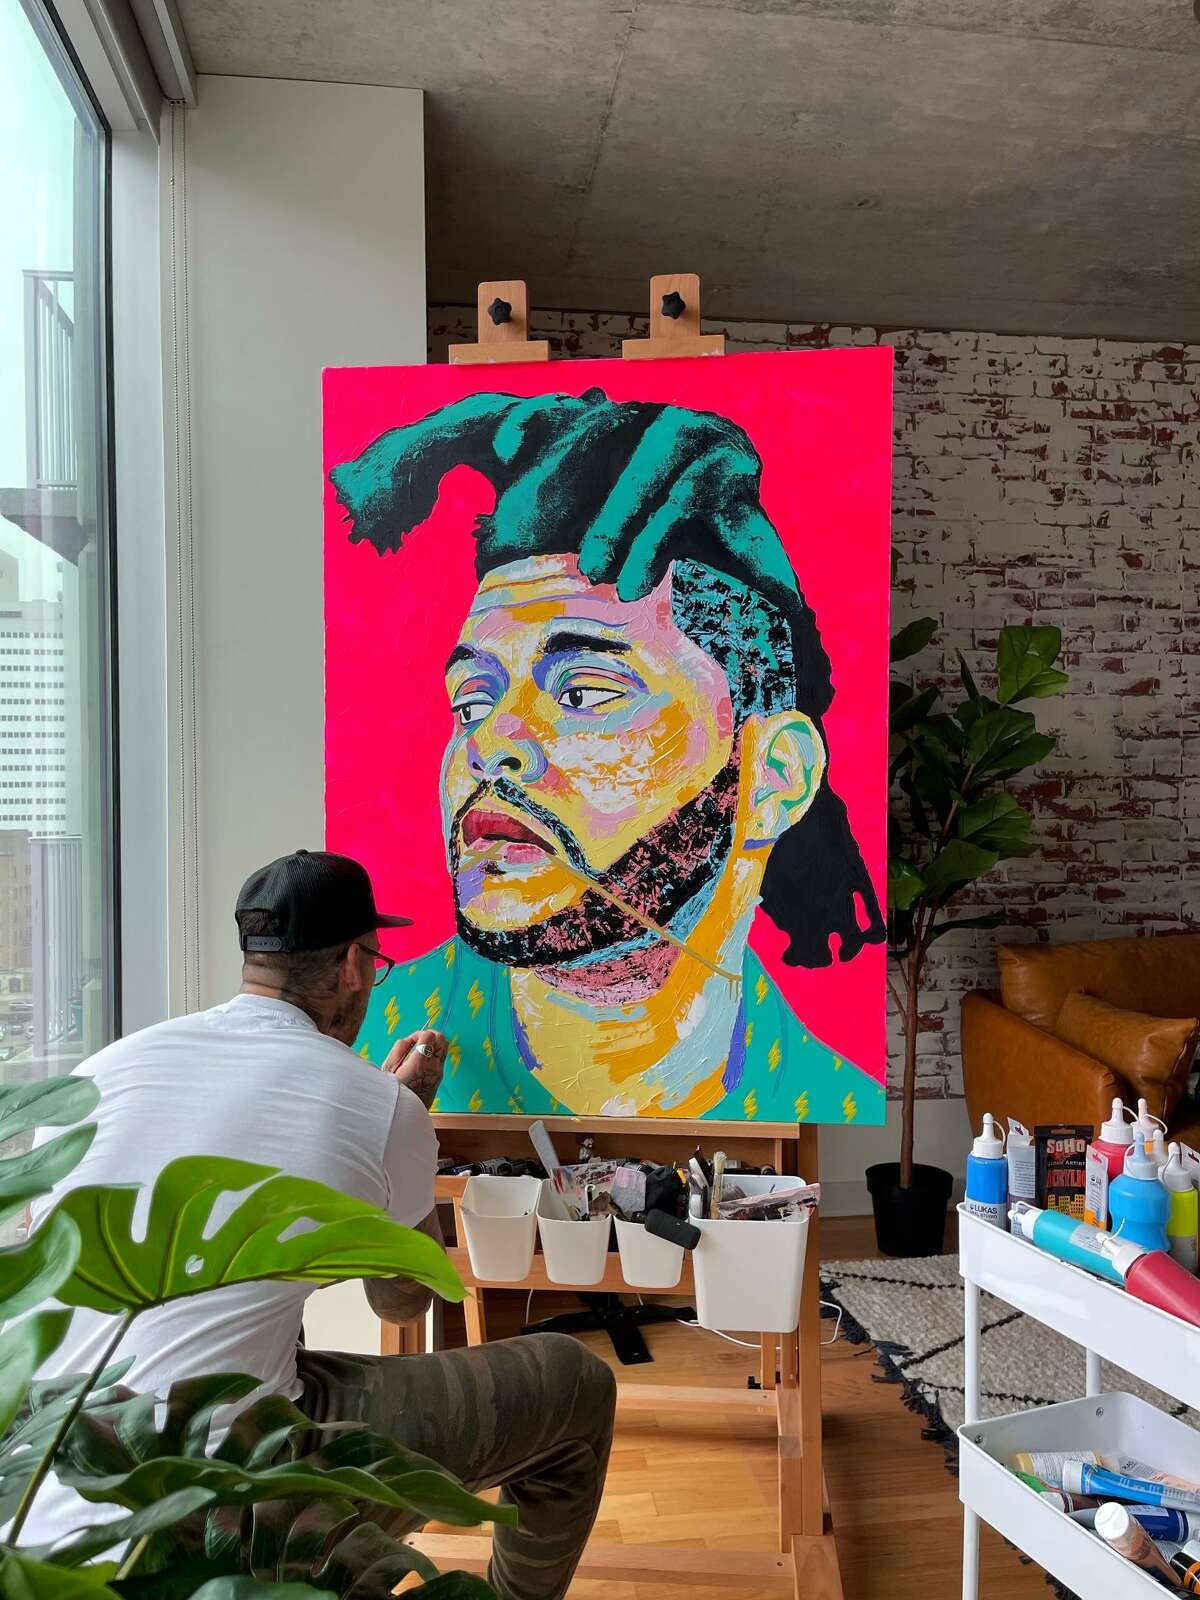 Israel Rodriguez completes a mural of The Weeknd in his studio.